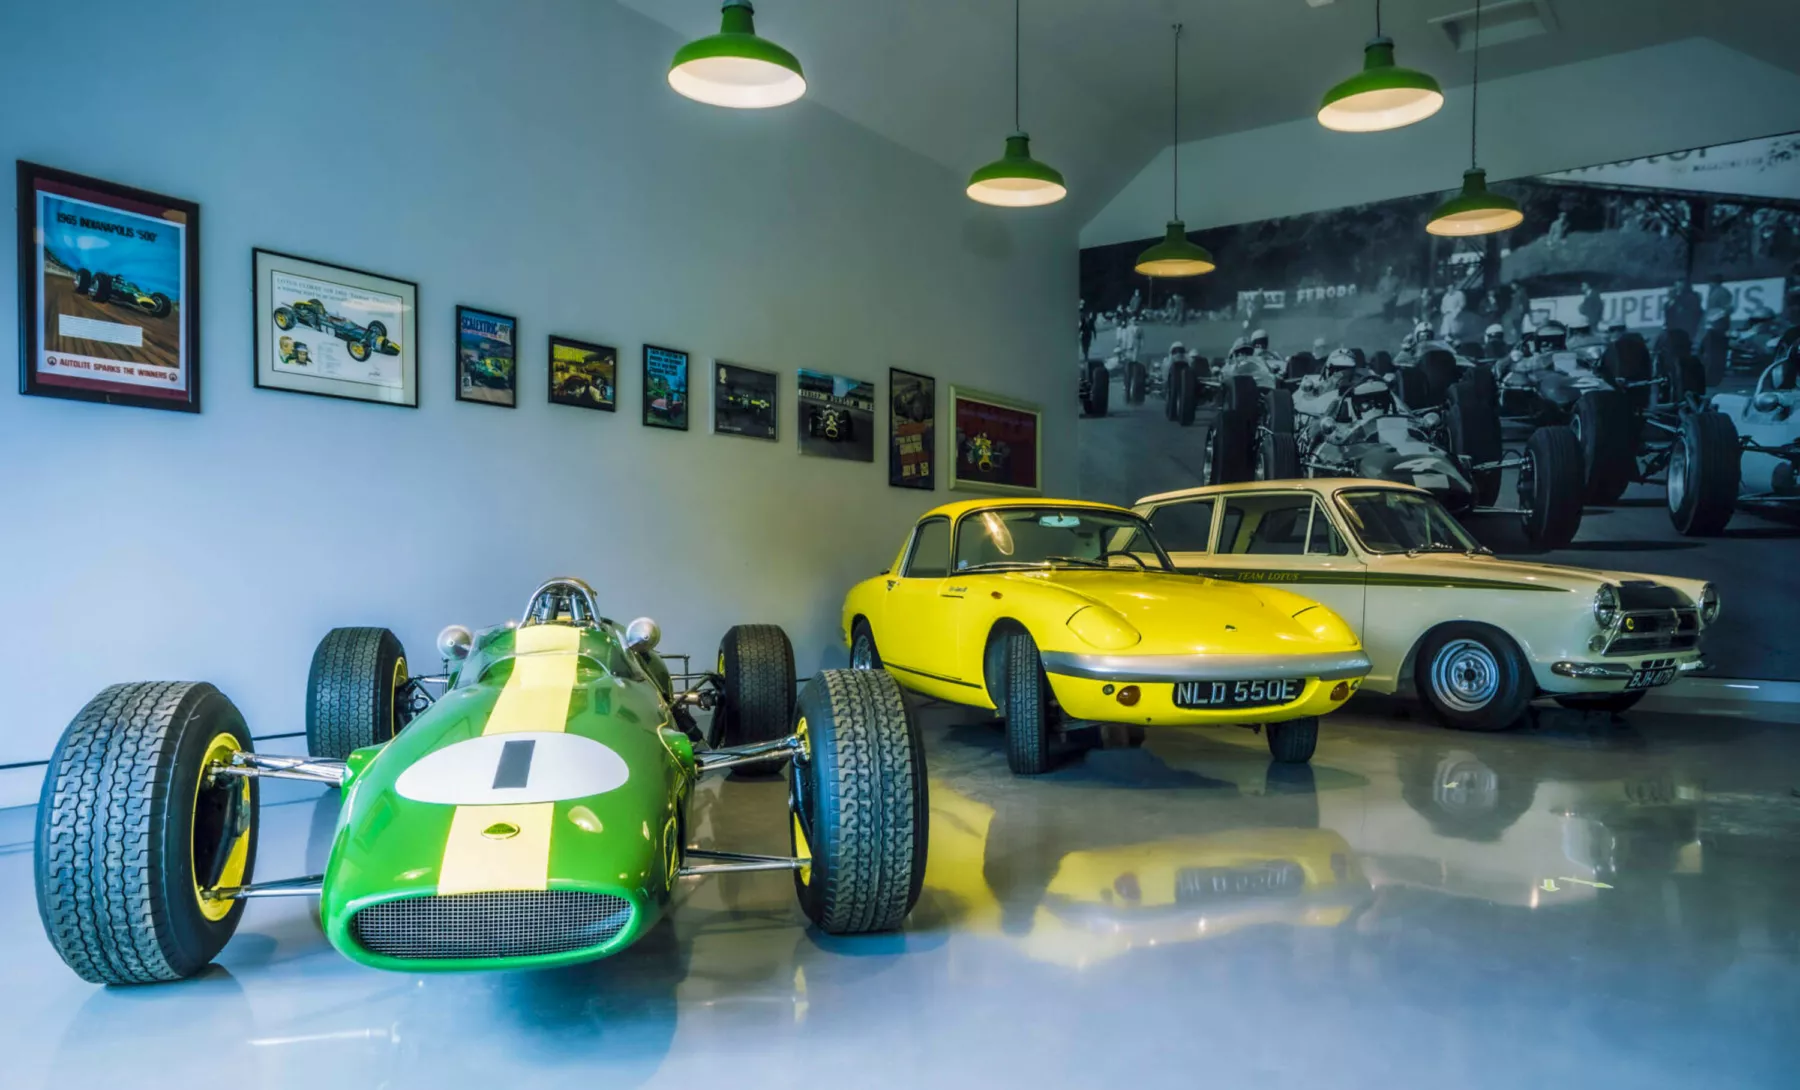 Inside the garage at the Jim Clark Motorsport Museum showing vintage Lotus sports cars all driven by Jim Clark (a green formula one Lotus Type 25, a yellow Lotus Elan S3 Coupe, a cream Lotus Cortina) and wall displays of historic motor racing photographs.